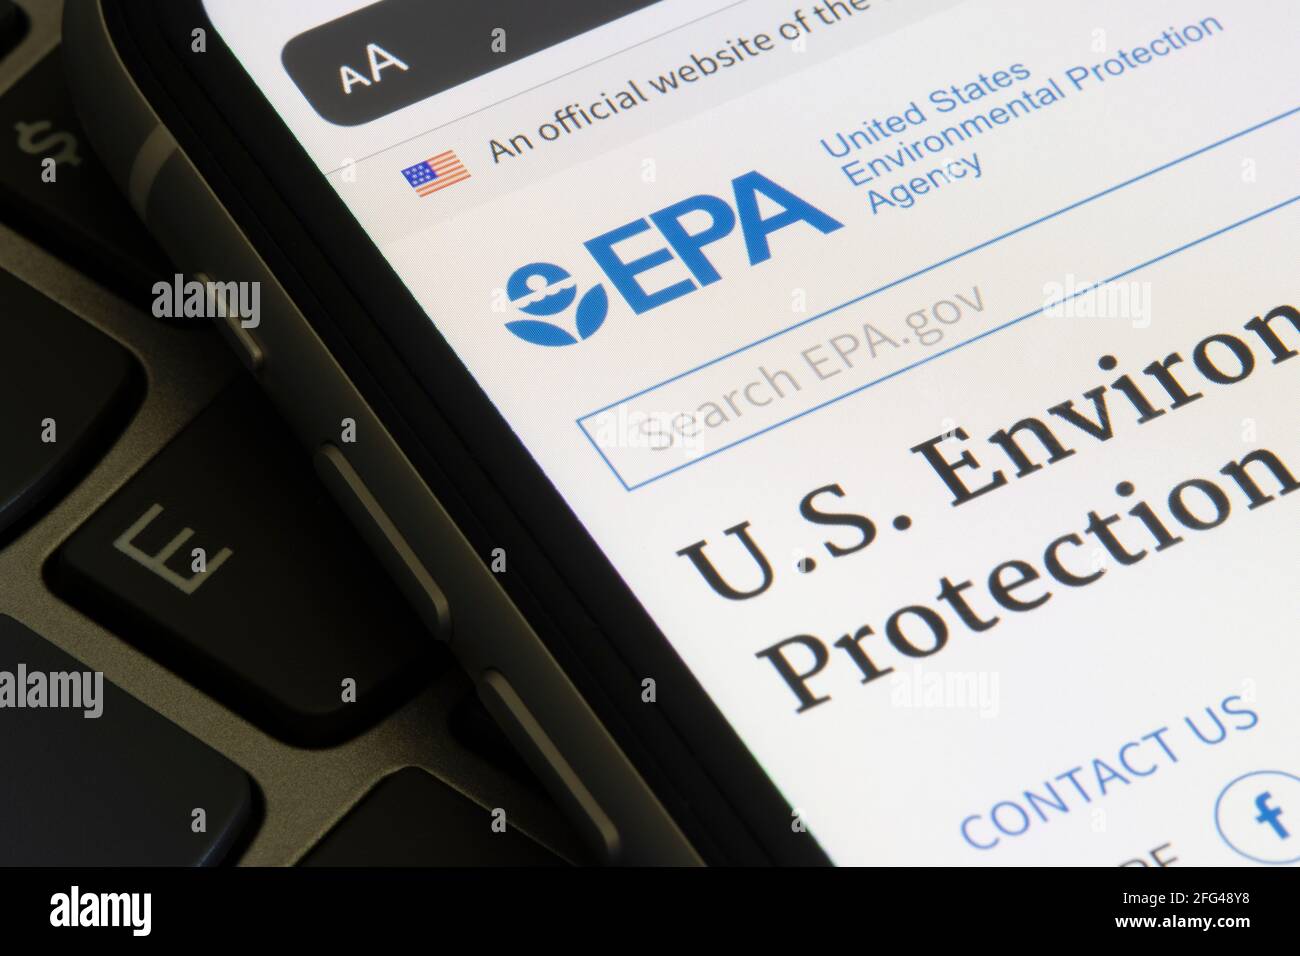 Closeup of the homepage of the United States Environmental Protection Agency (EPA) website seen on an iPhone. Stock Photo